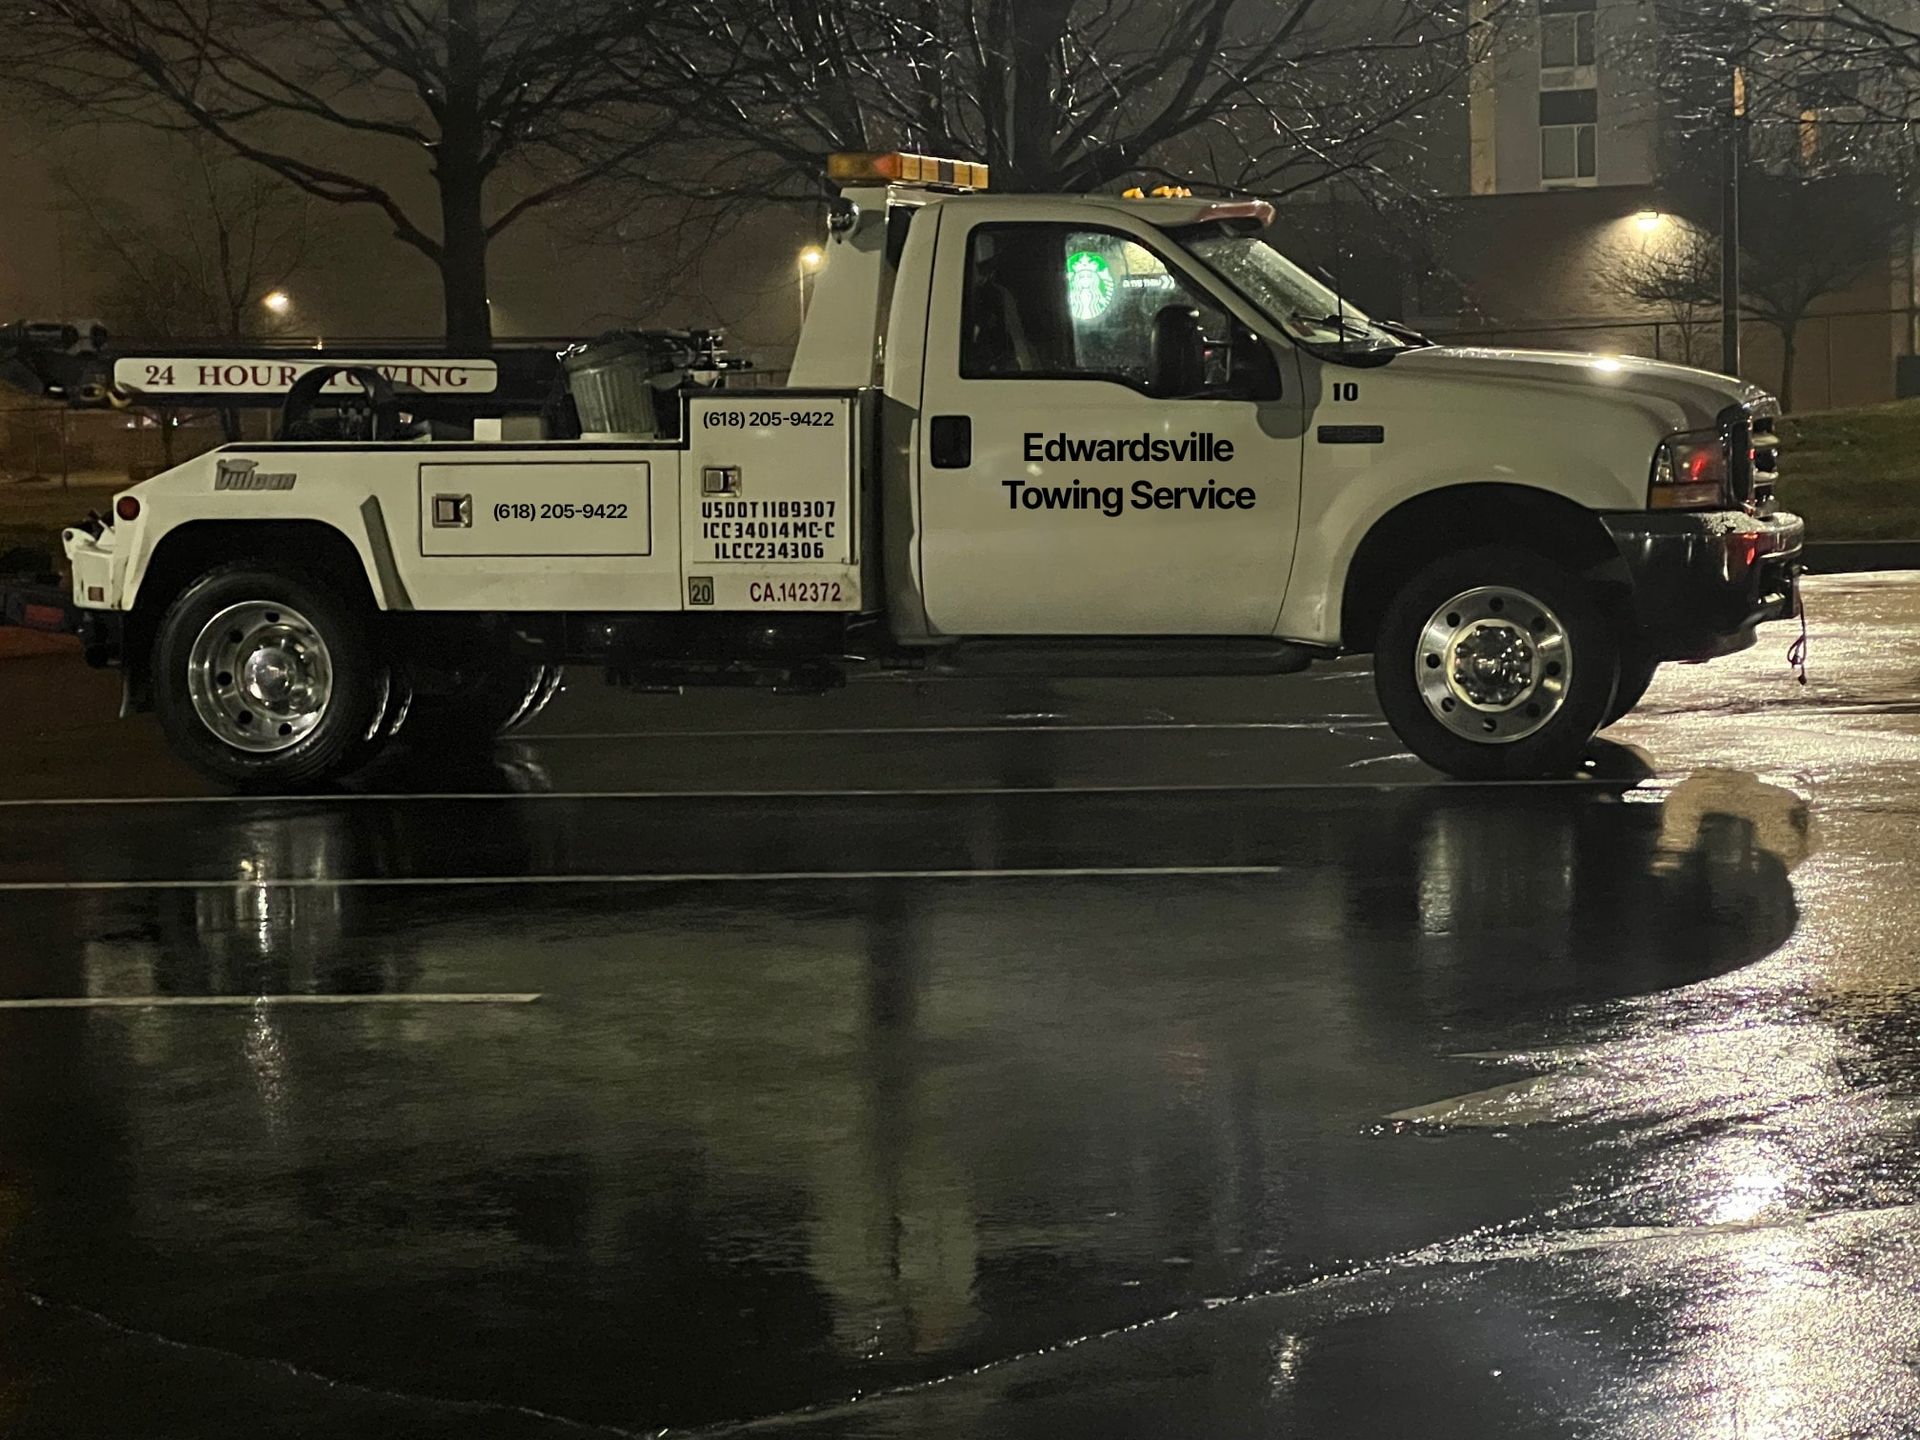 a white edwardsville towing service truck is parked in a parking lot